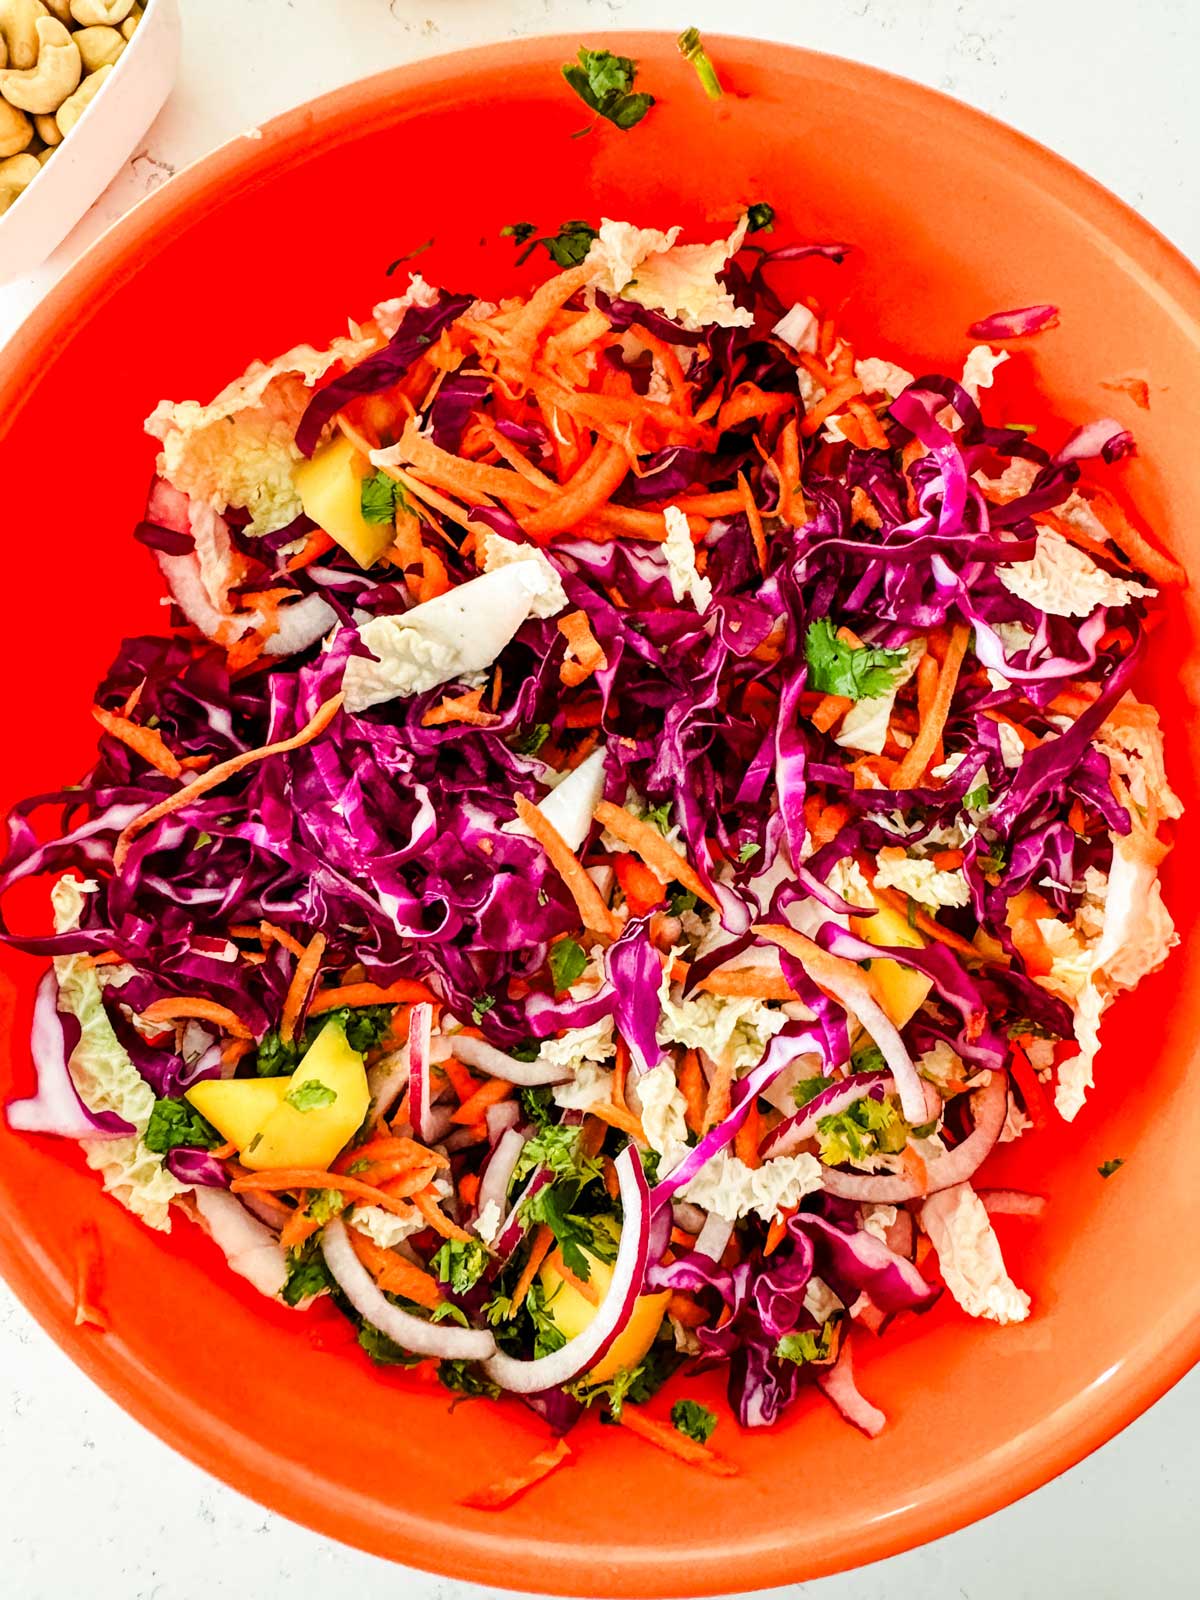 Napa cabbage, diced mango, red onion, carrots, cabbage, and cilantro tossed together in a lareg orange bowl.